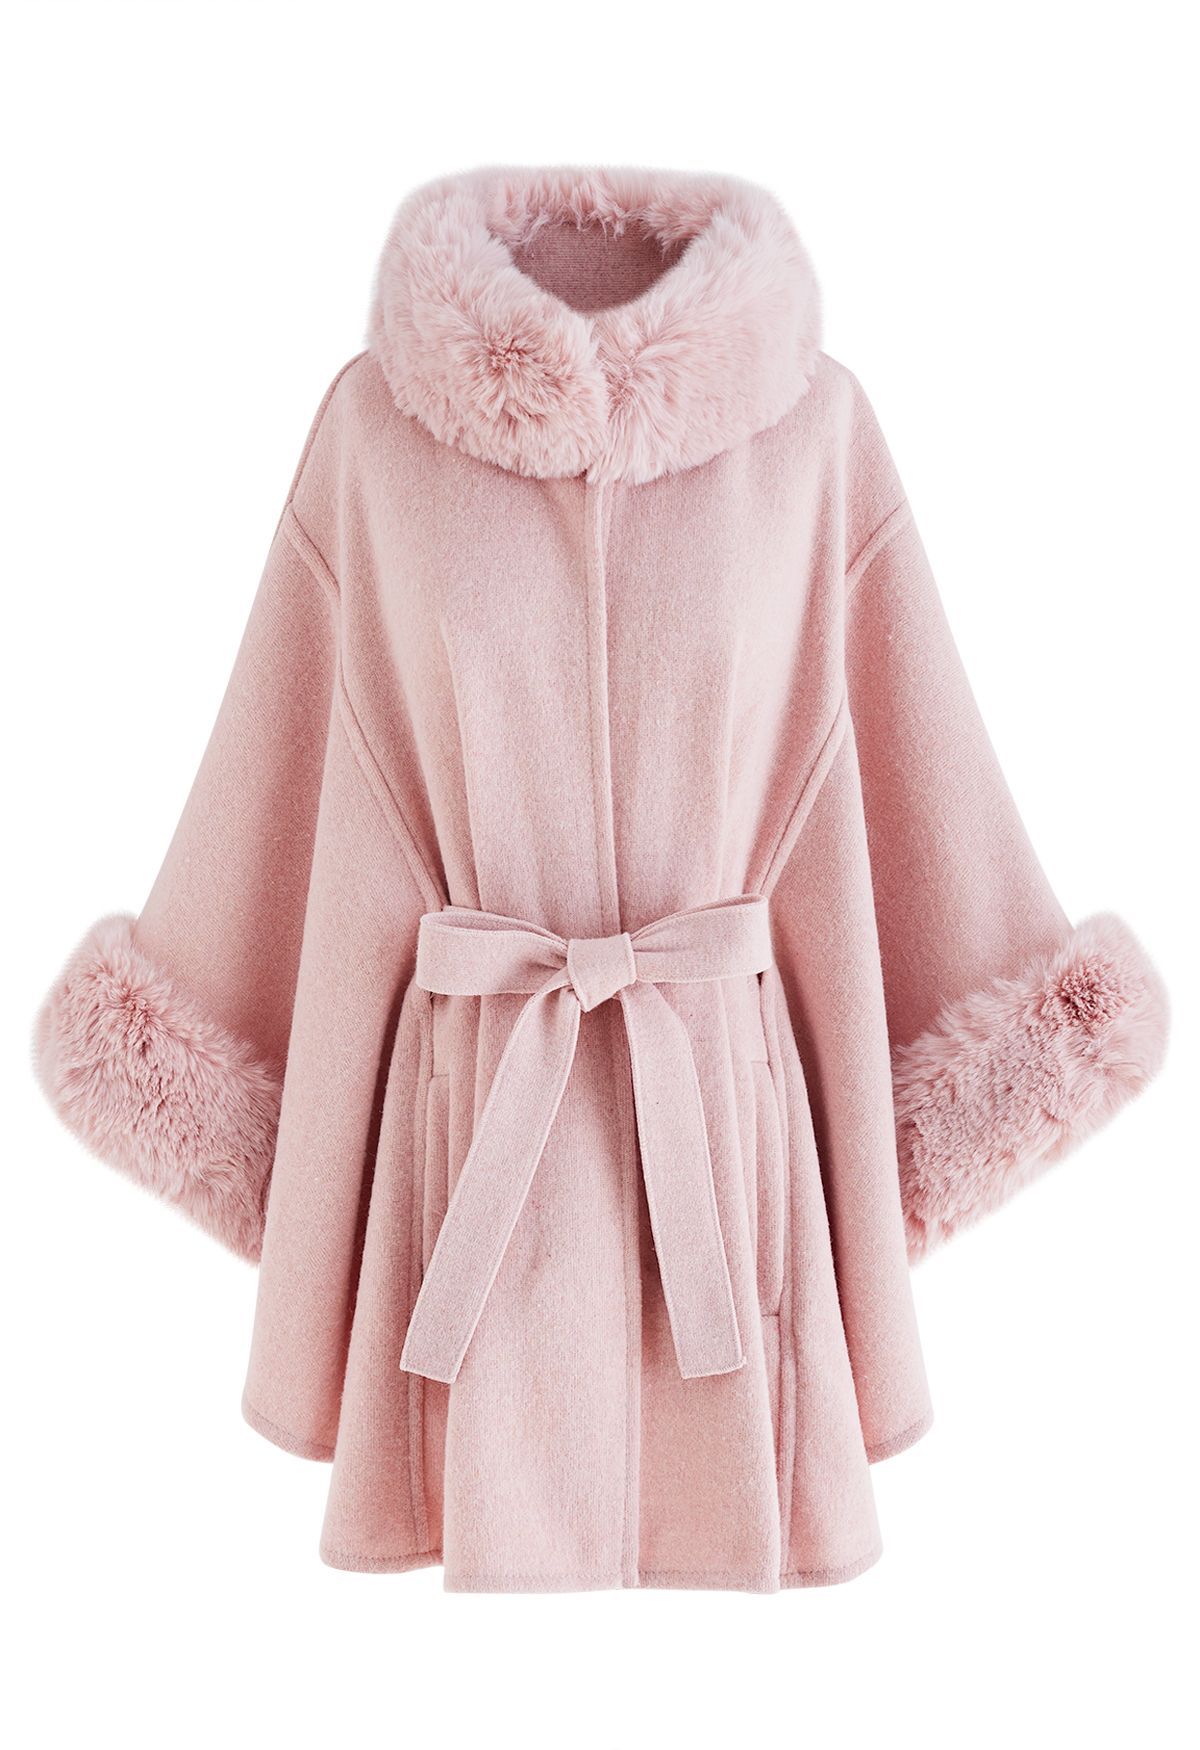 Self-Tie Bowknot Faux Fur Poncho in Pink | Chicwish